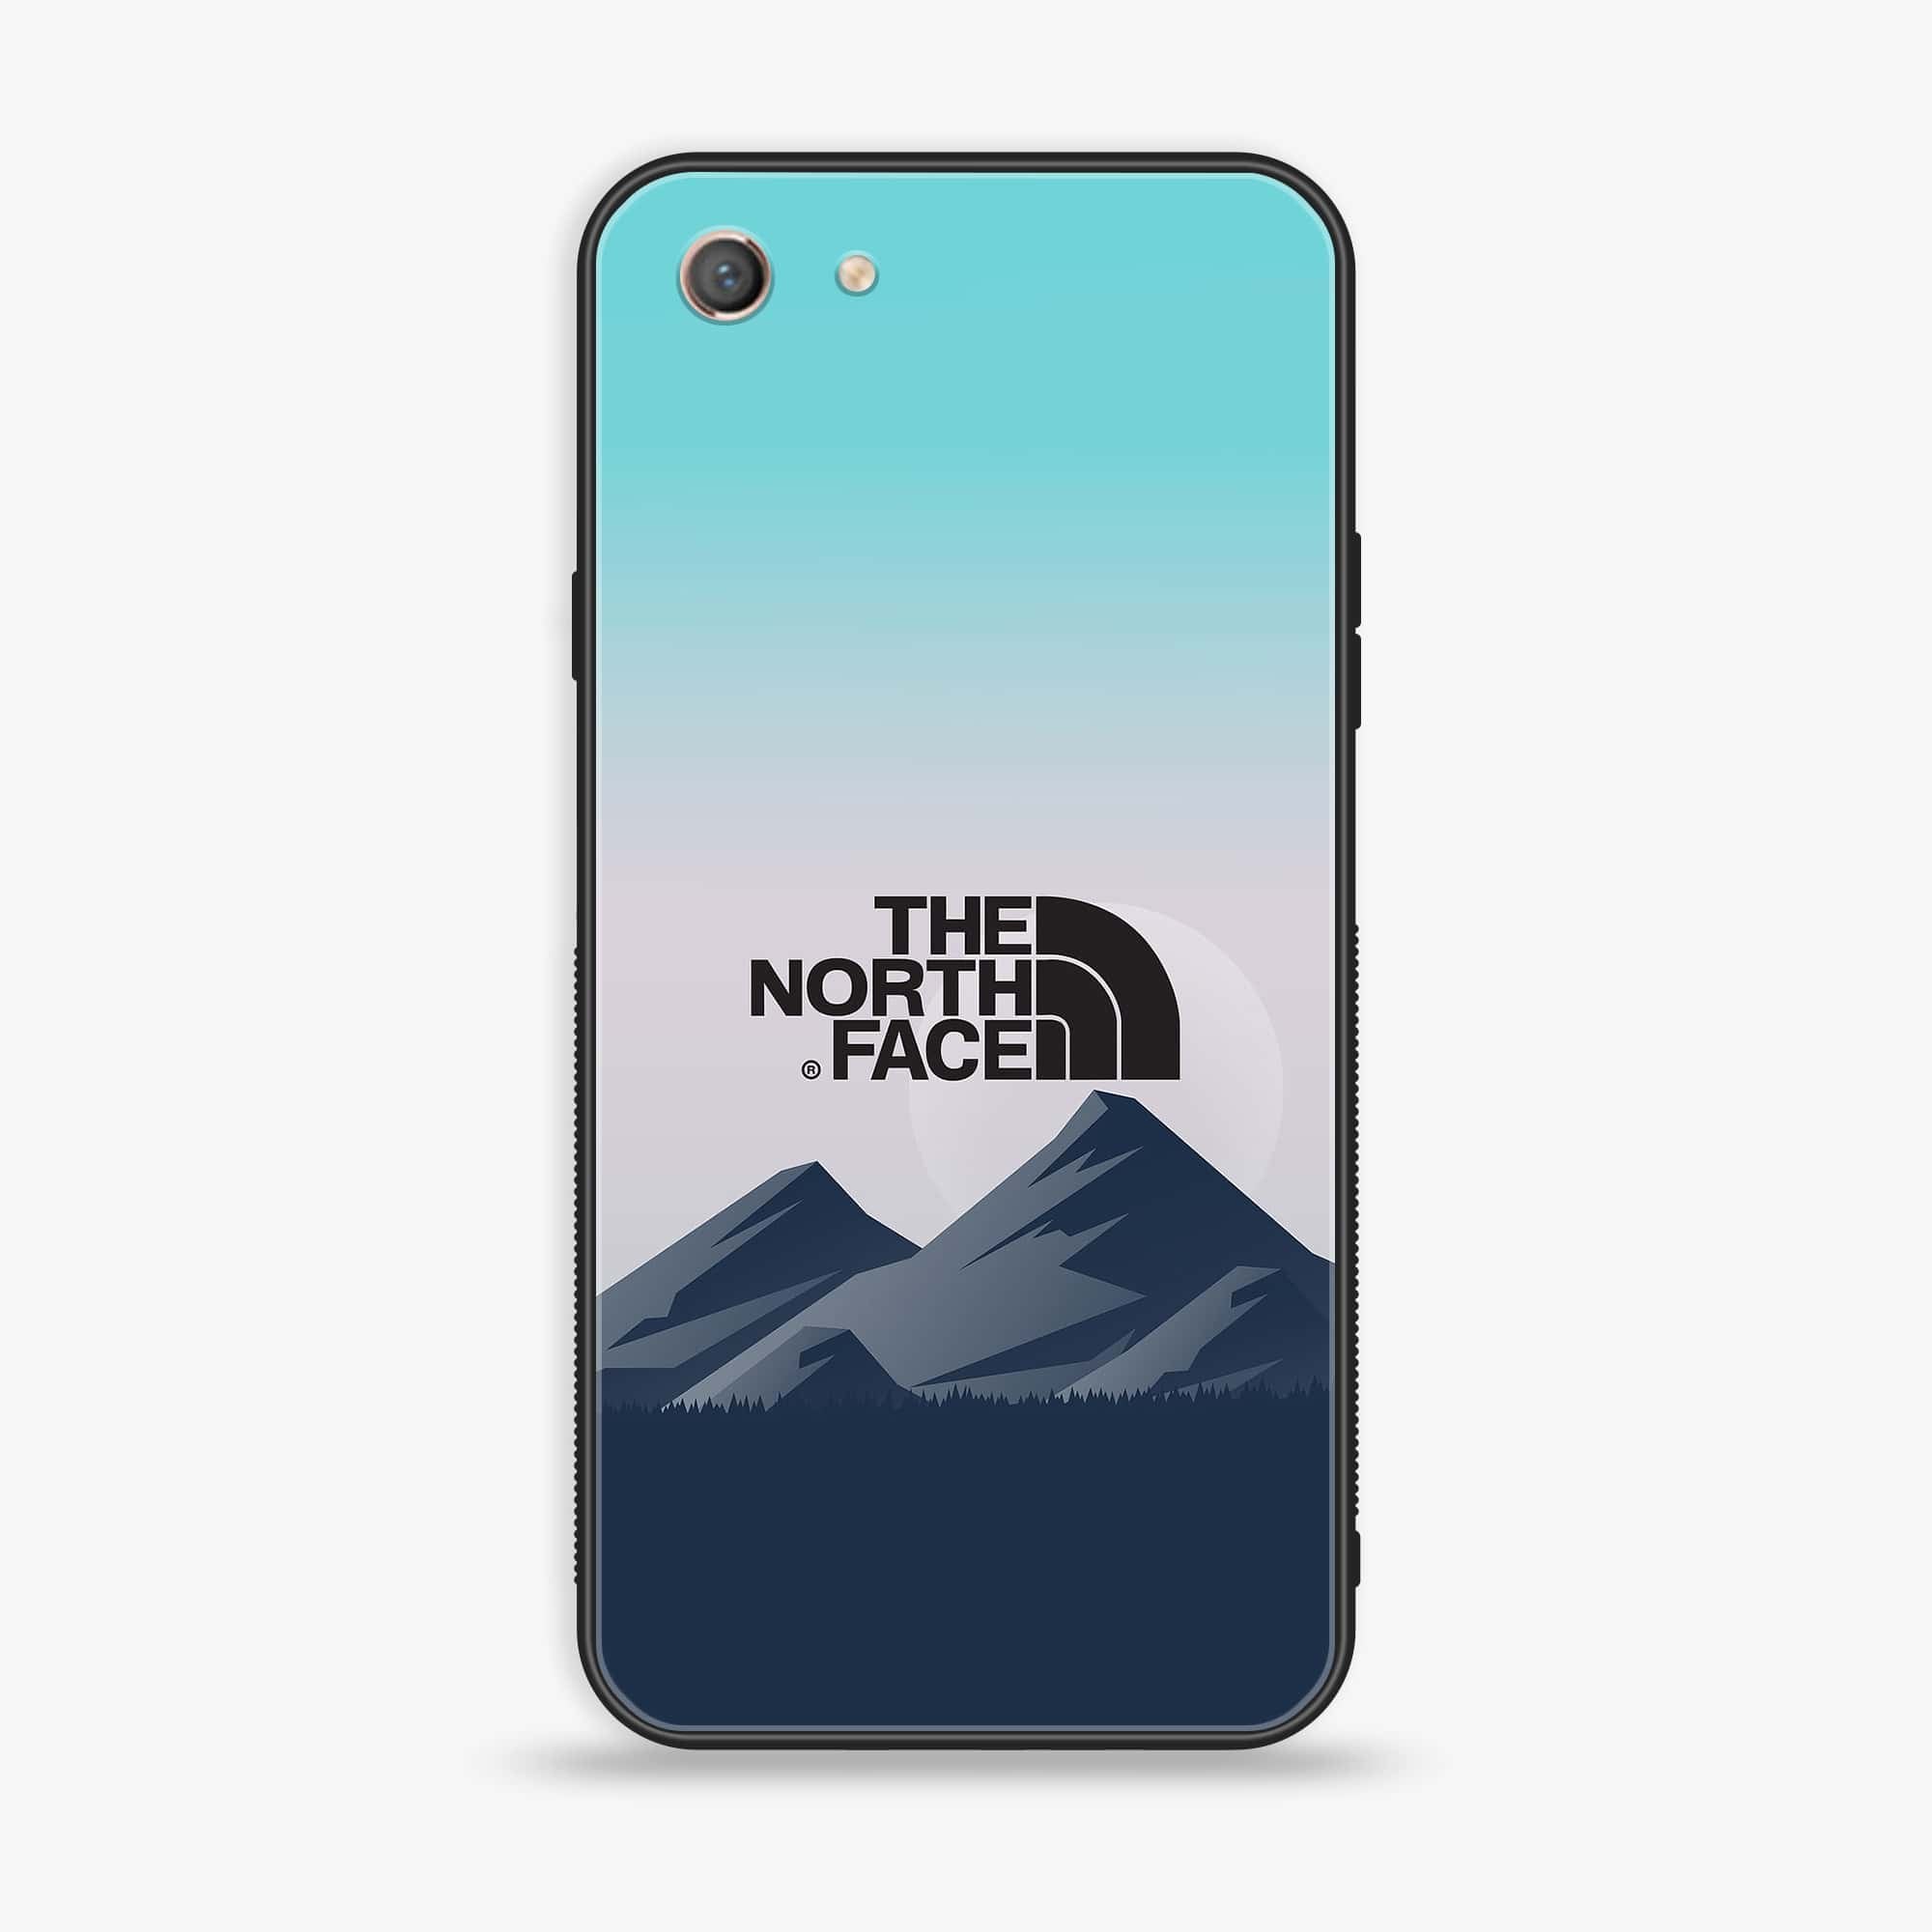 Oppo A71 (2018) - The North Face Series - Premium Printed Glass soft Bumper shock Proof Case